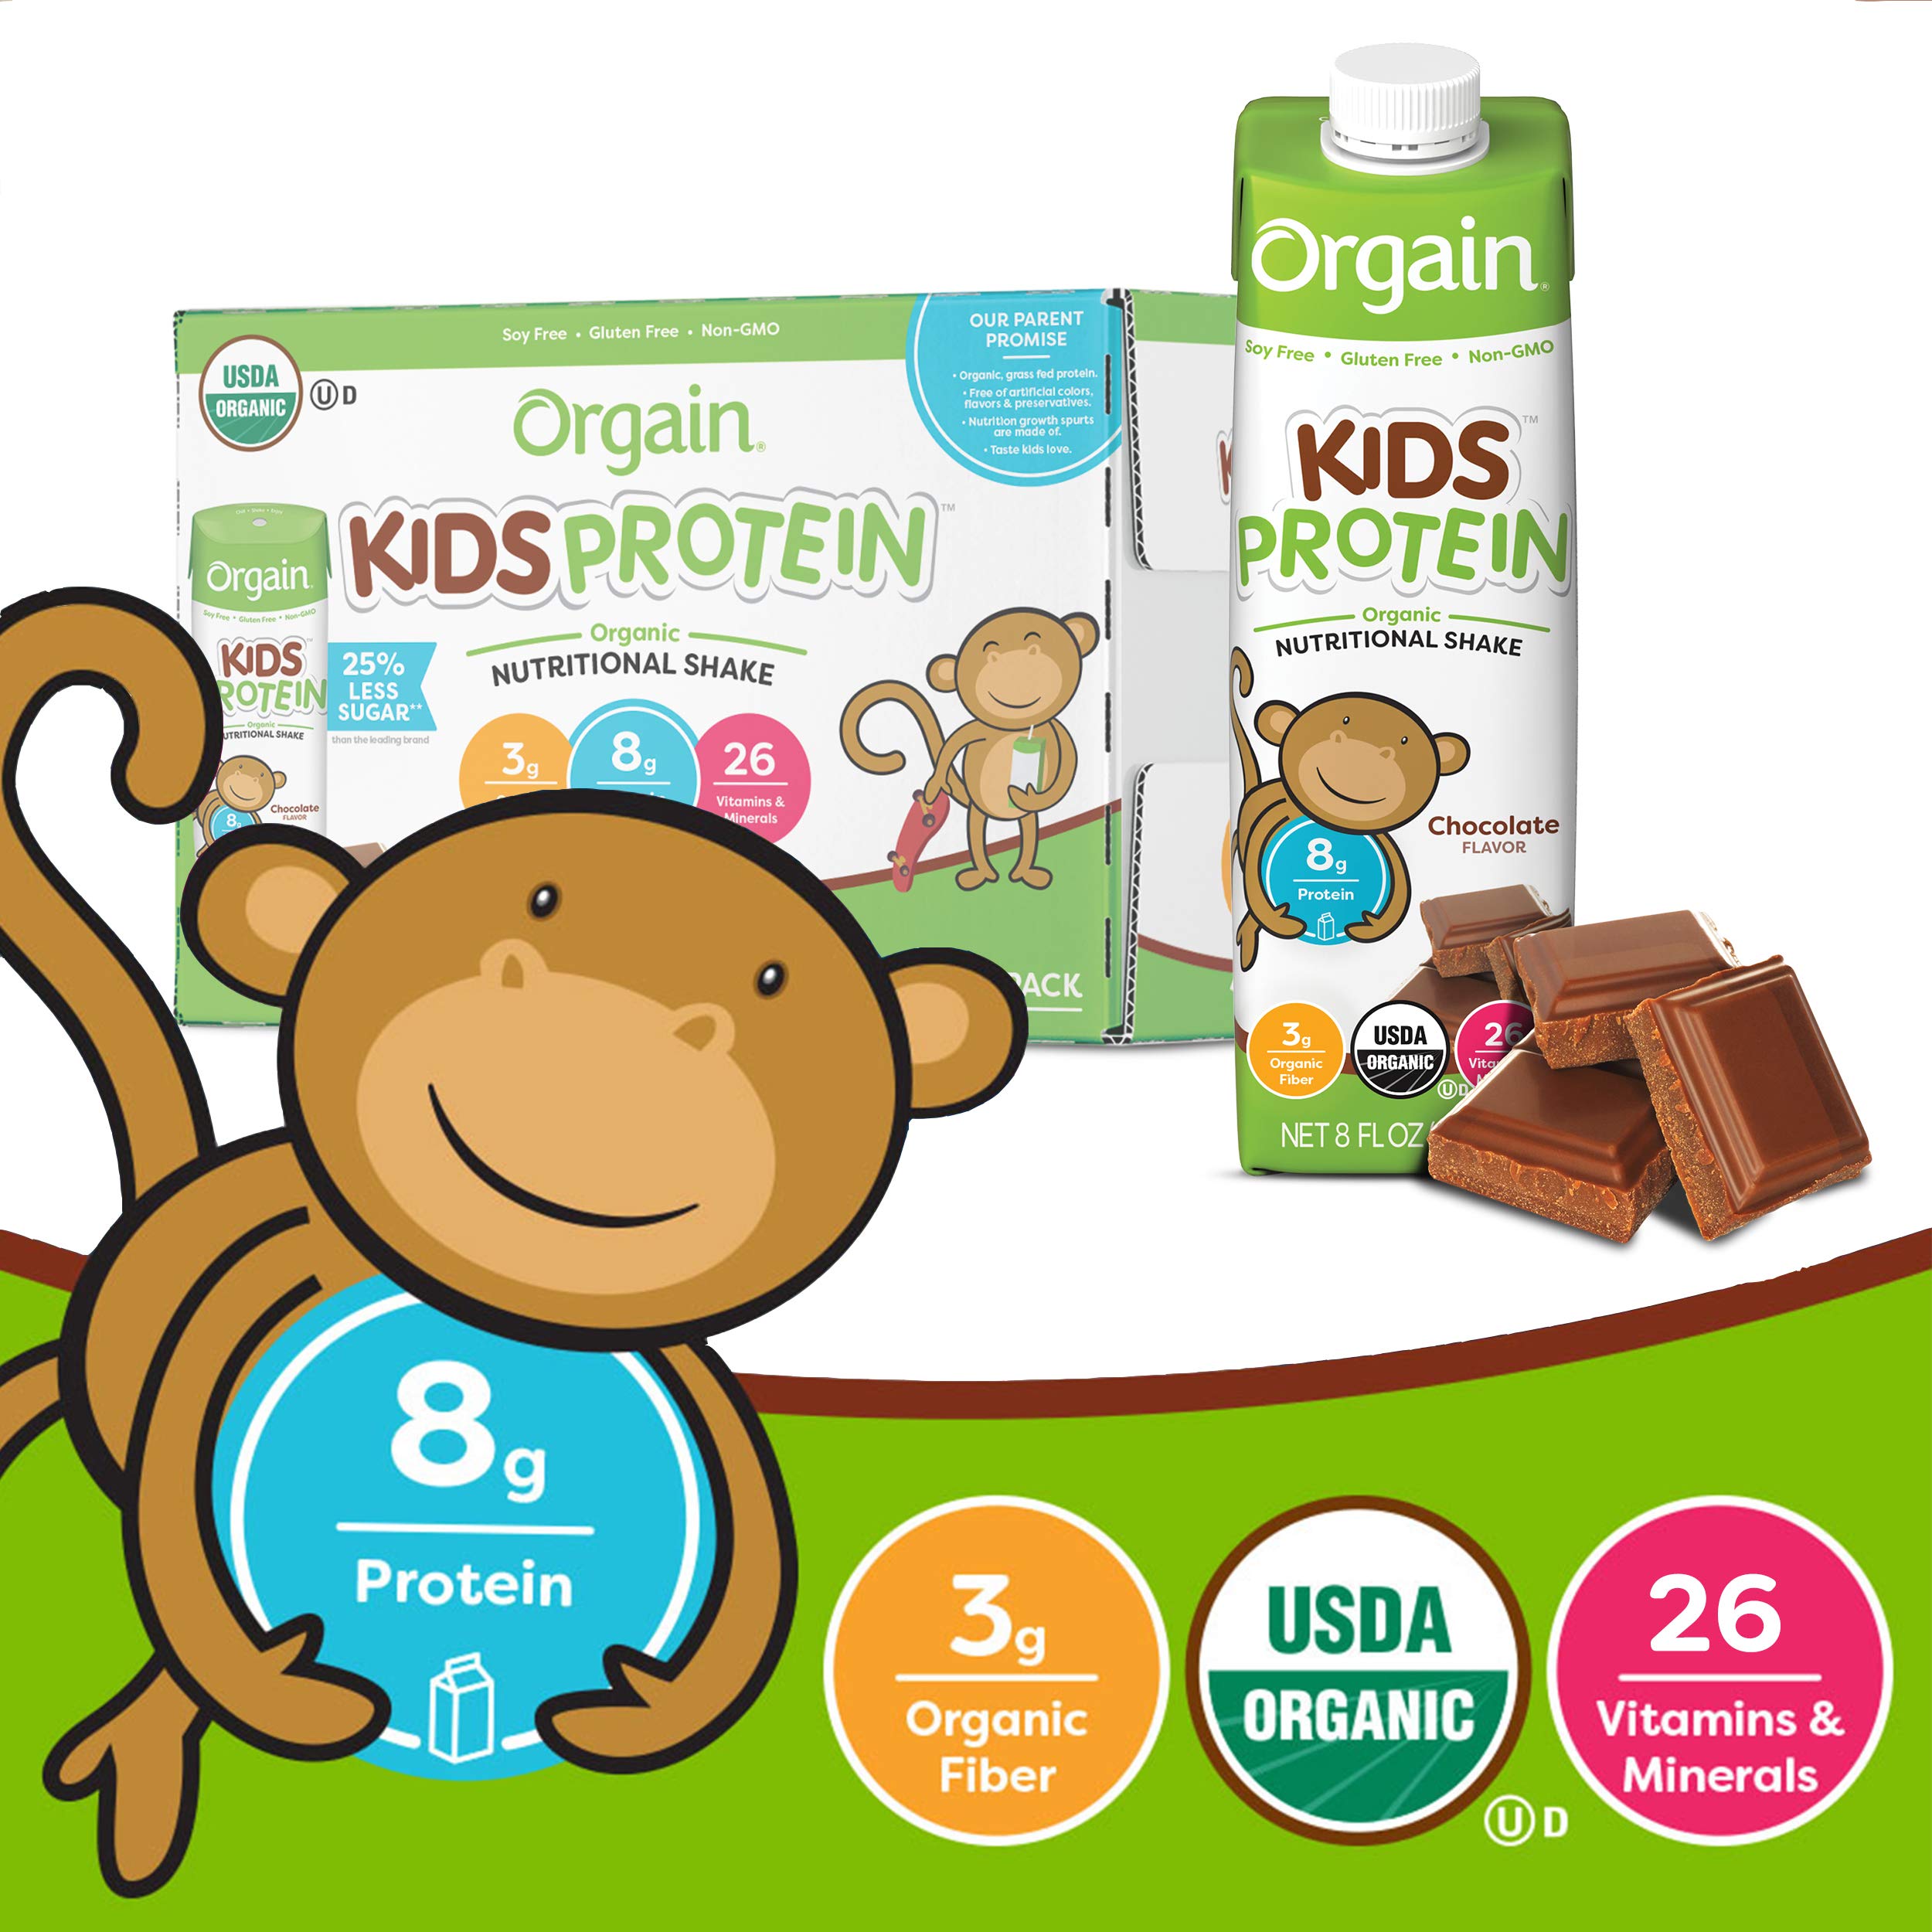 Orgain Organic Kids Protein Nutritional Shake, Chocolate - Great for Breakfast & Snacks, 21 Vitamins & Minerals, 10 Fruits & Vegetables, Gluten Free, Soy Free, 8.25 oz, 12 Count (Packaging May Vary)